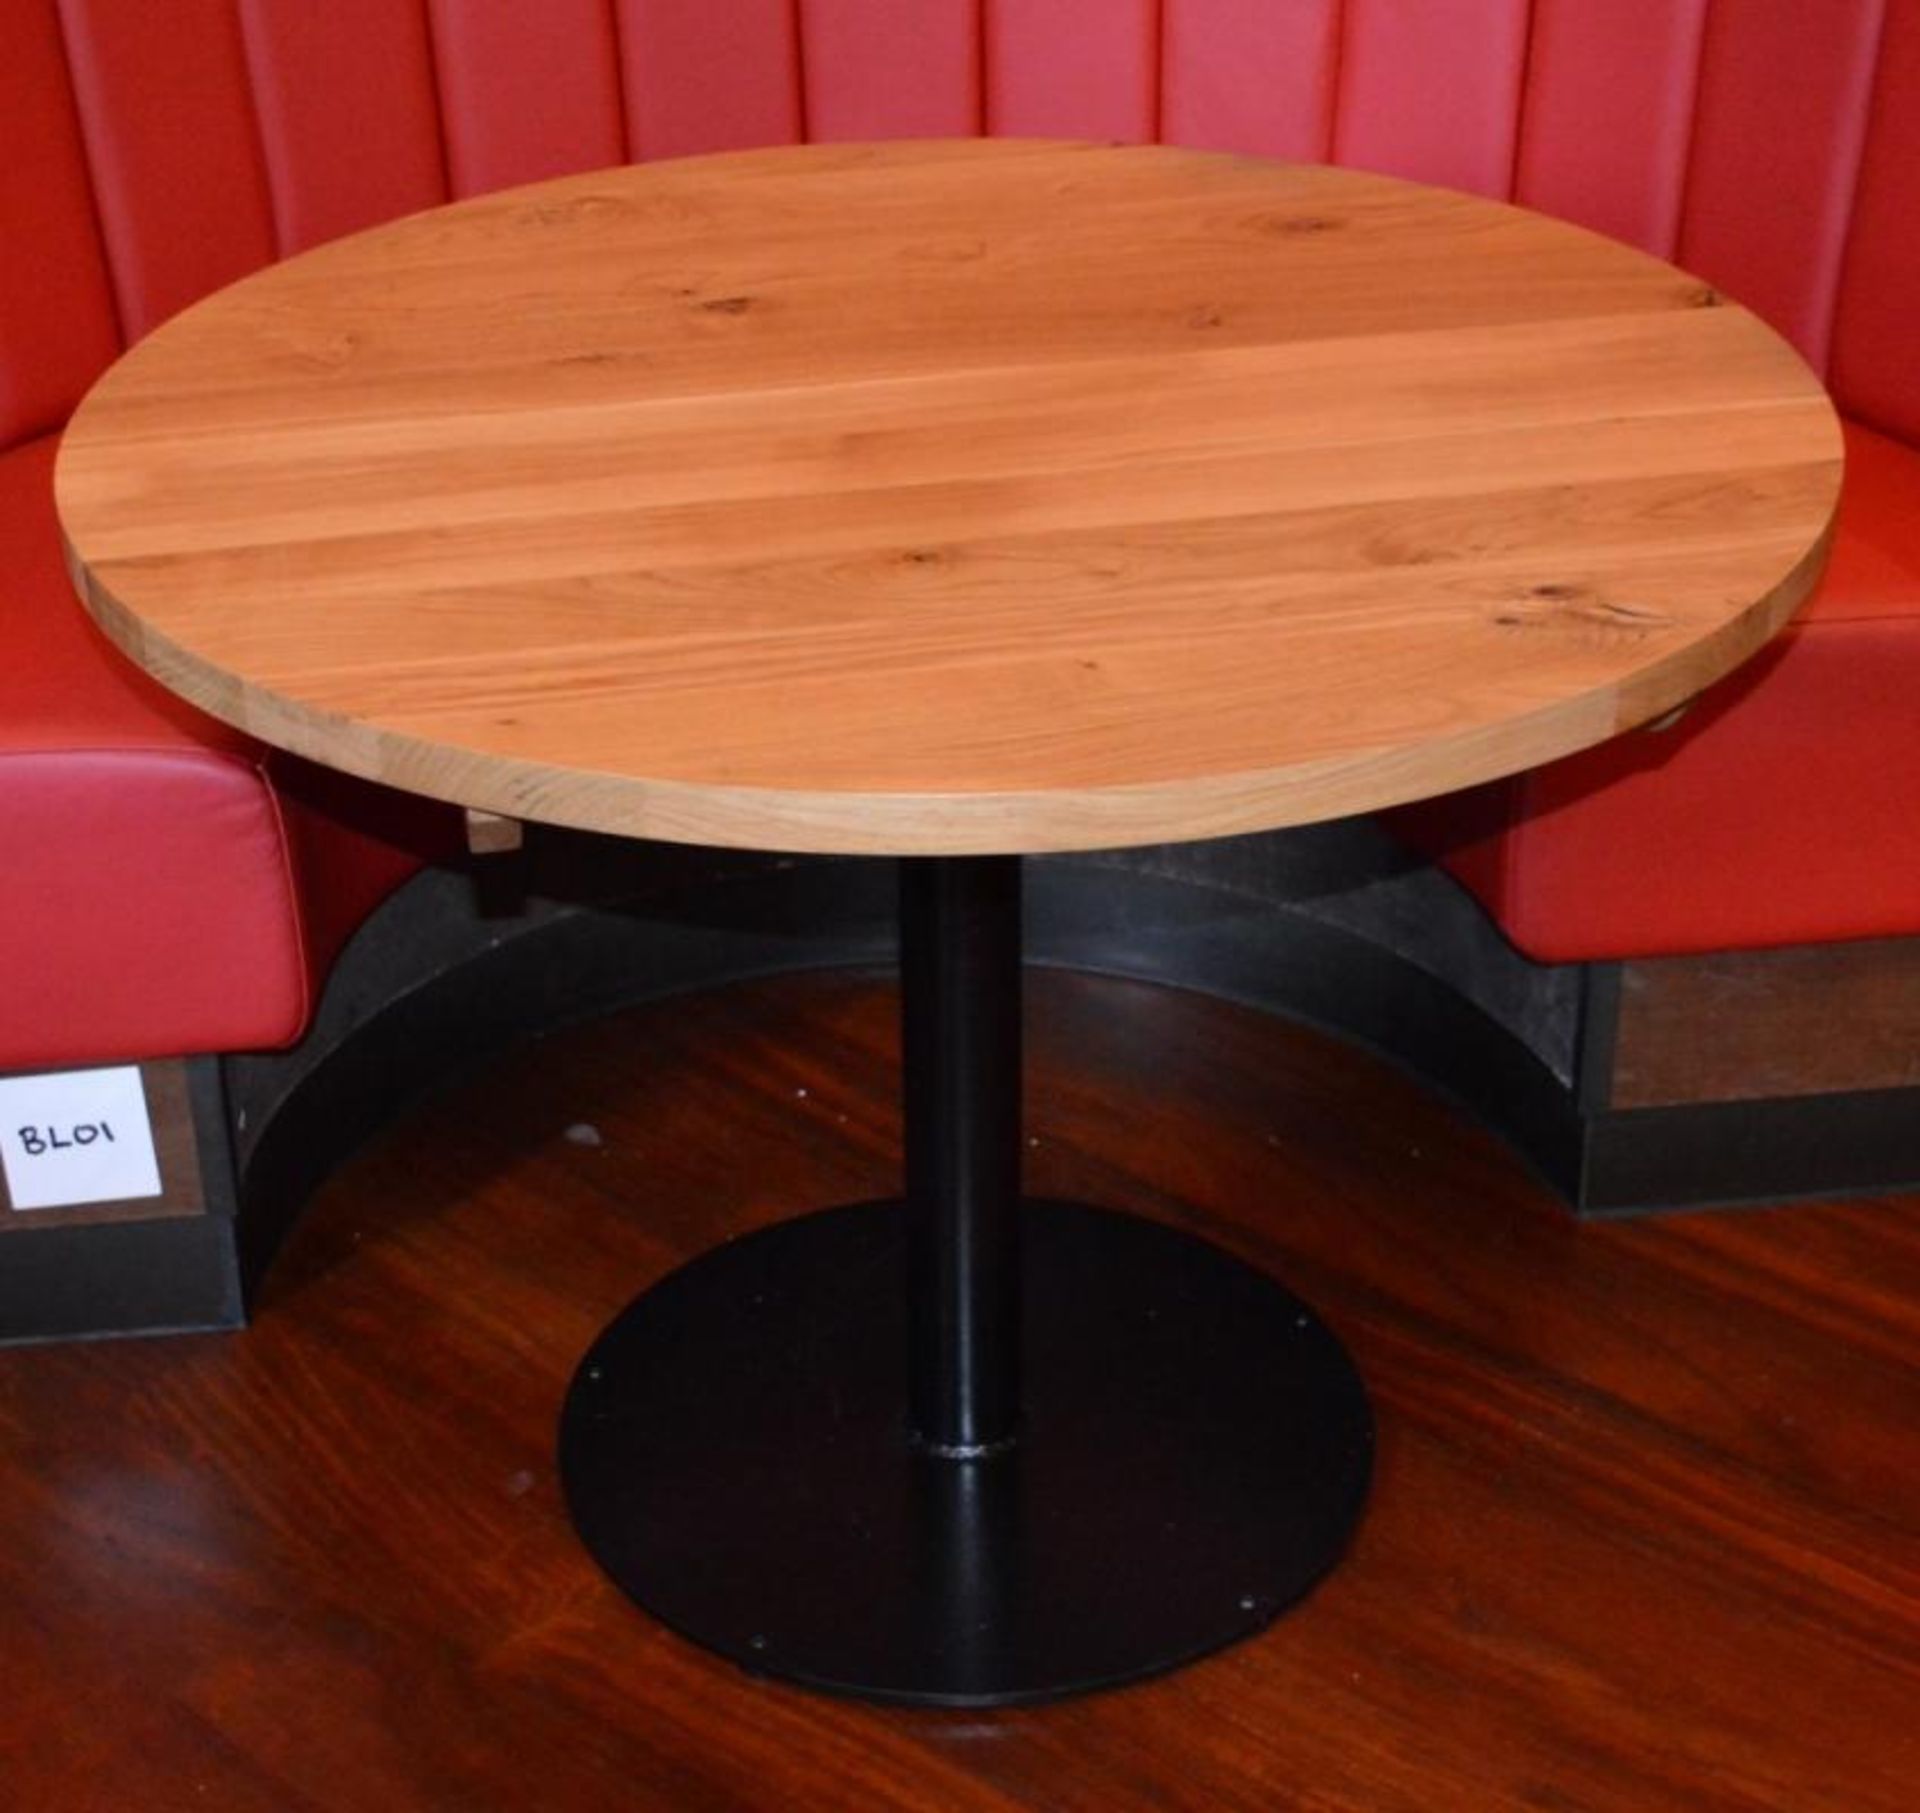 1 x Round Restaurant / Bistro Table - Wooden Topped With A Metal Base - Diameter 90cm / Height 76cm